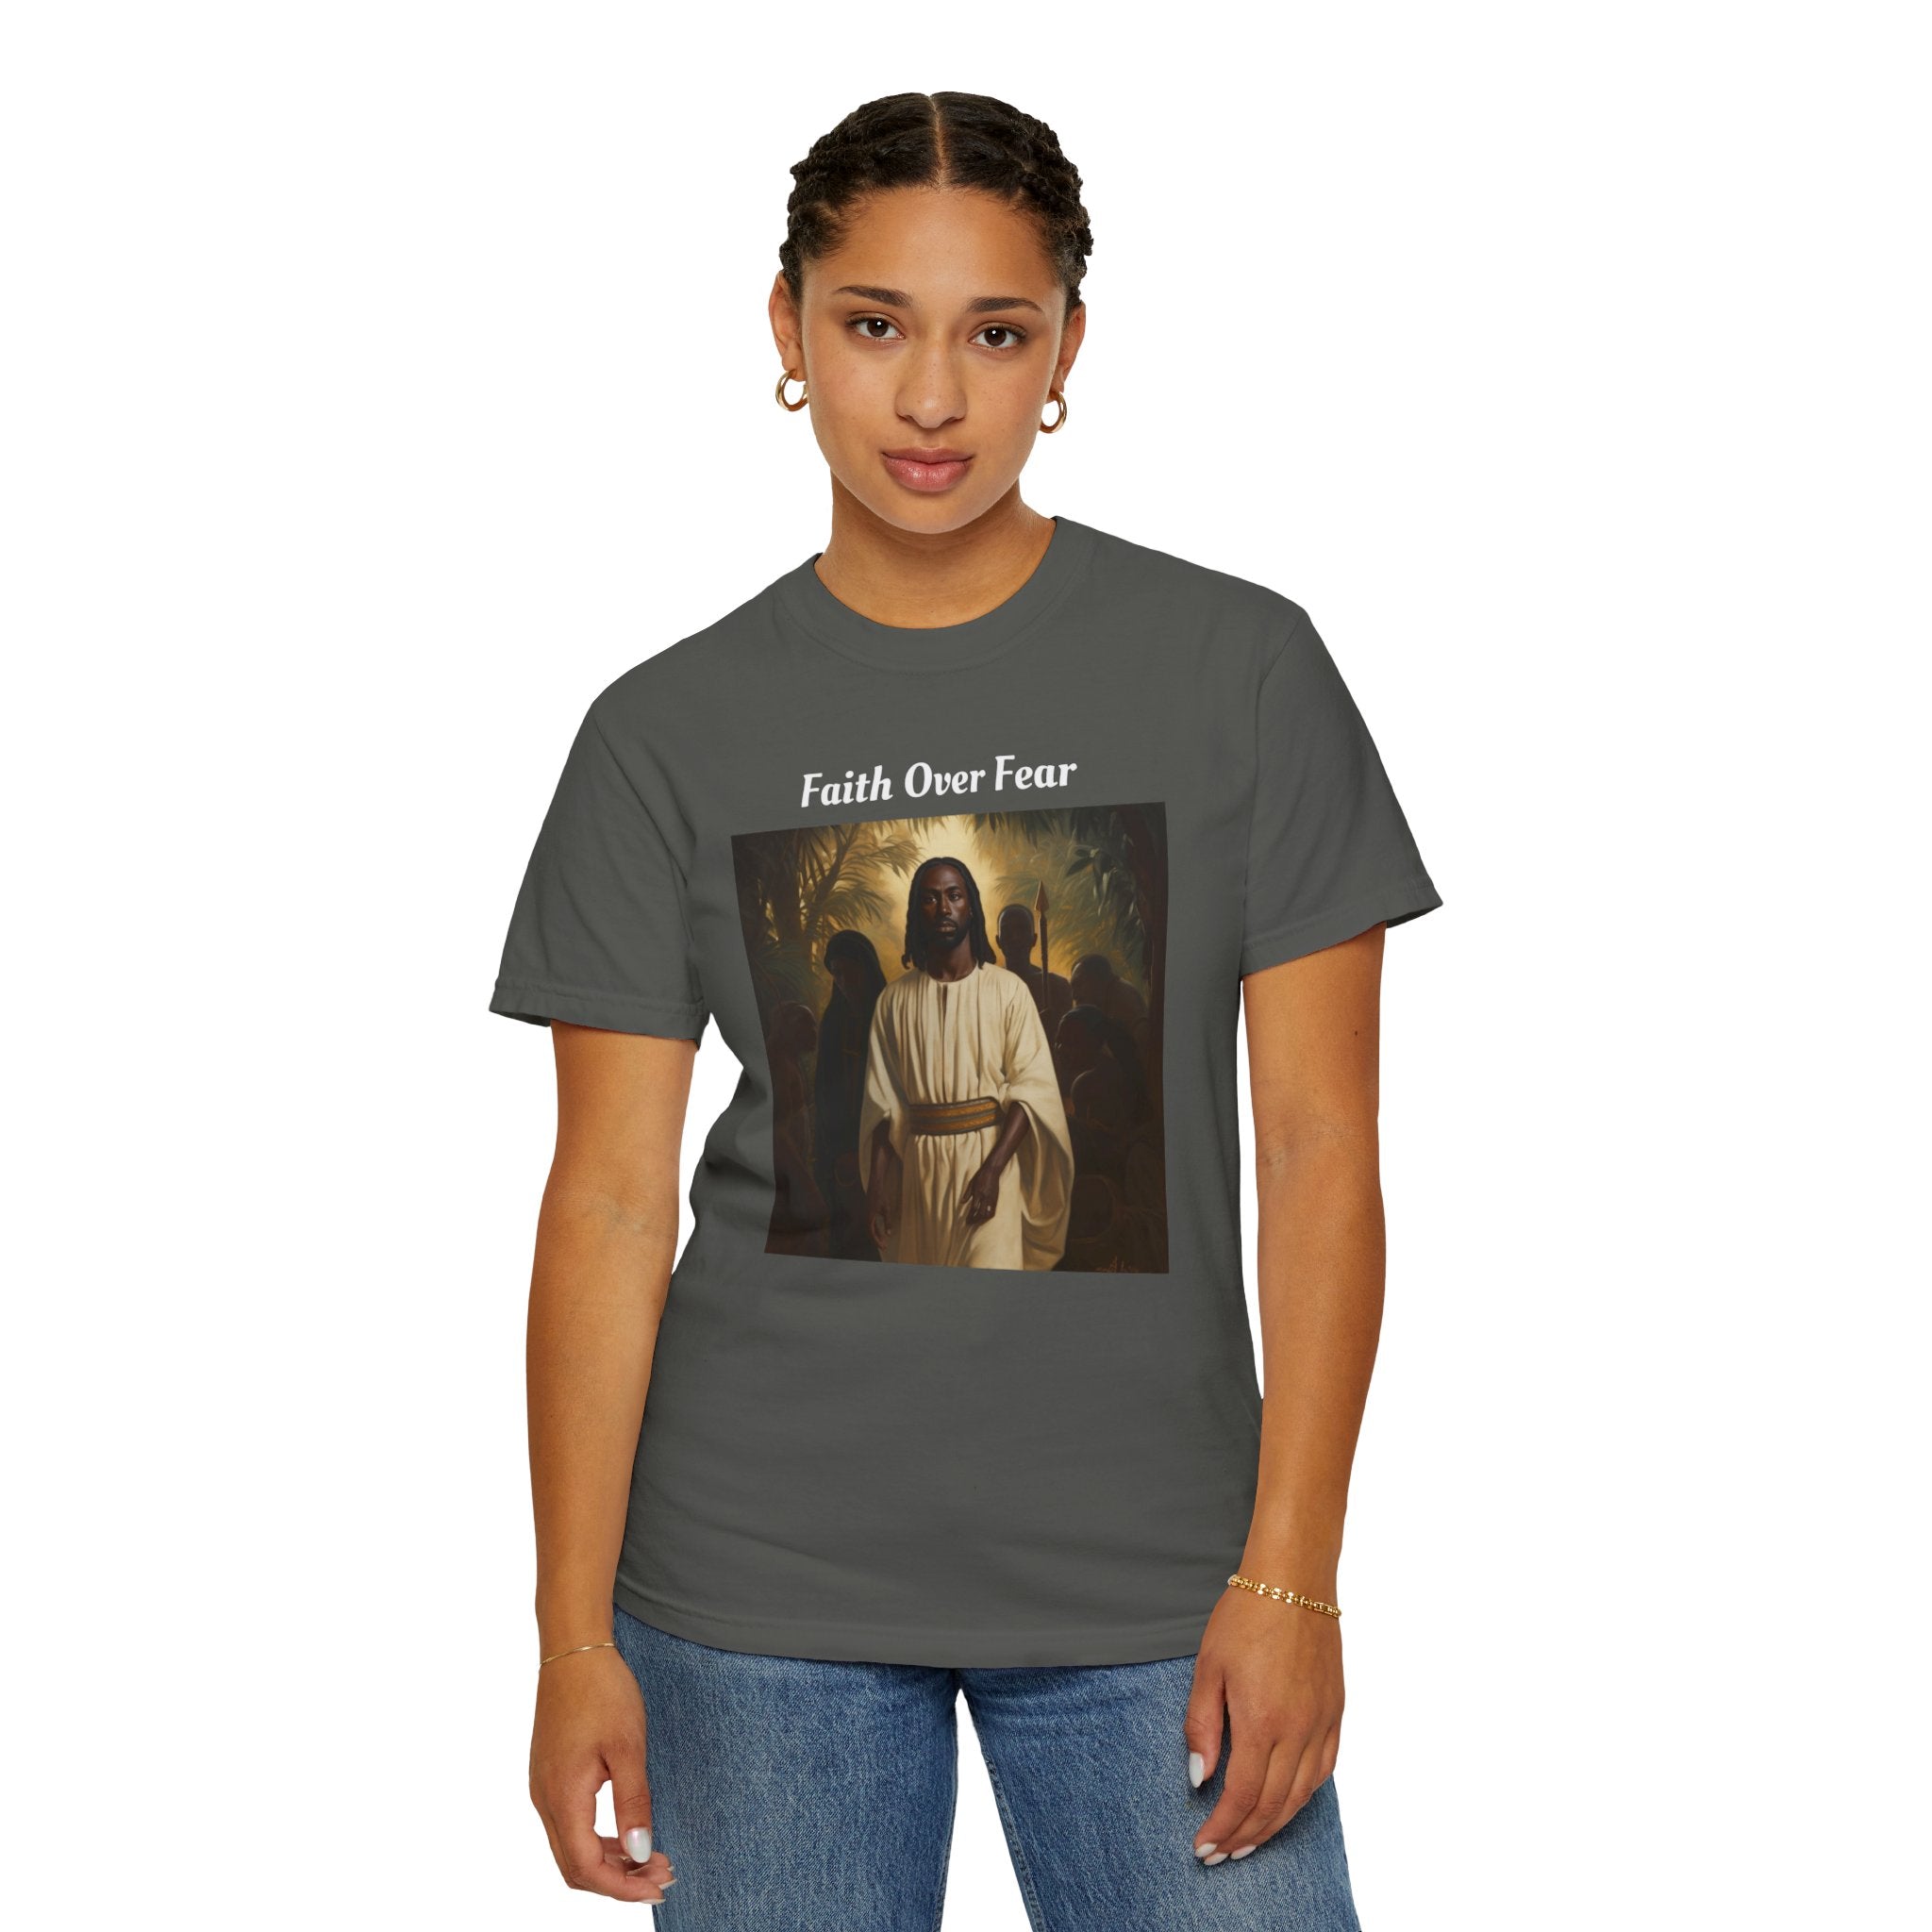 "Faith Over Fear" Unisex Garment-Dyed T-shirt - Your Ultimate Emblem of Spiritual Strength & Style: Embrace Spiritual Gratitude with This Stylish, Faith-Inspired Comfort Wear Gift